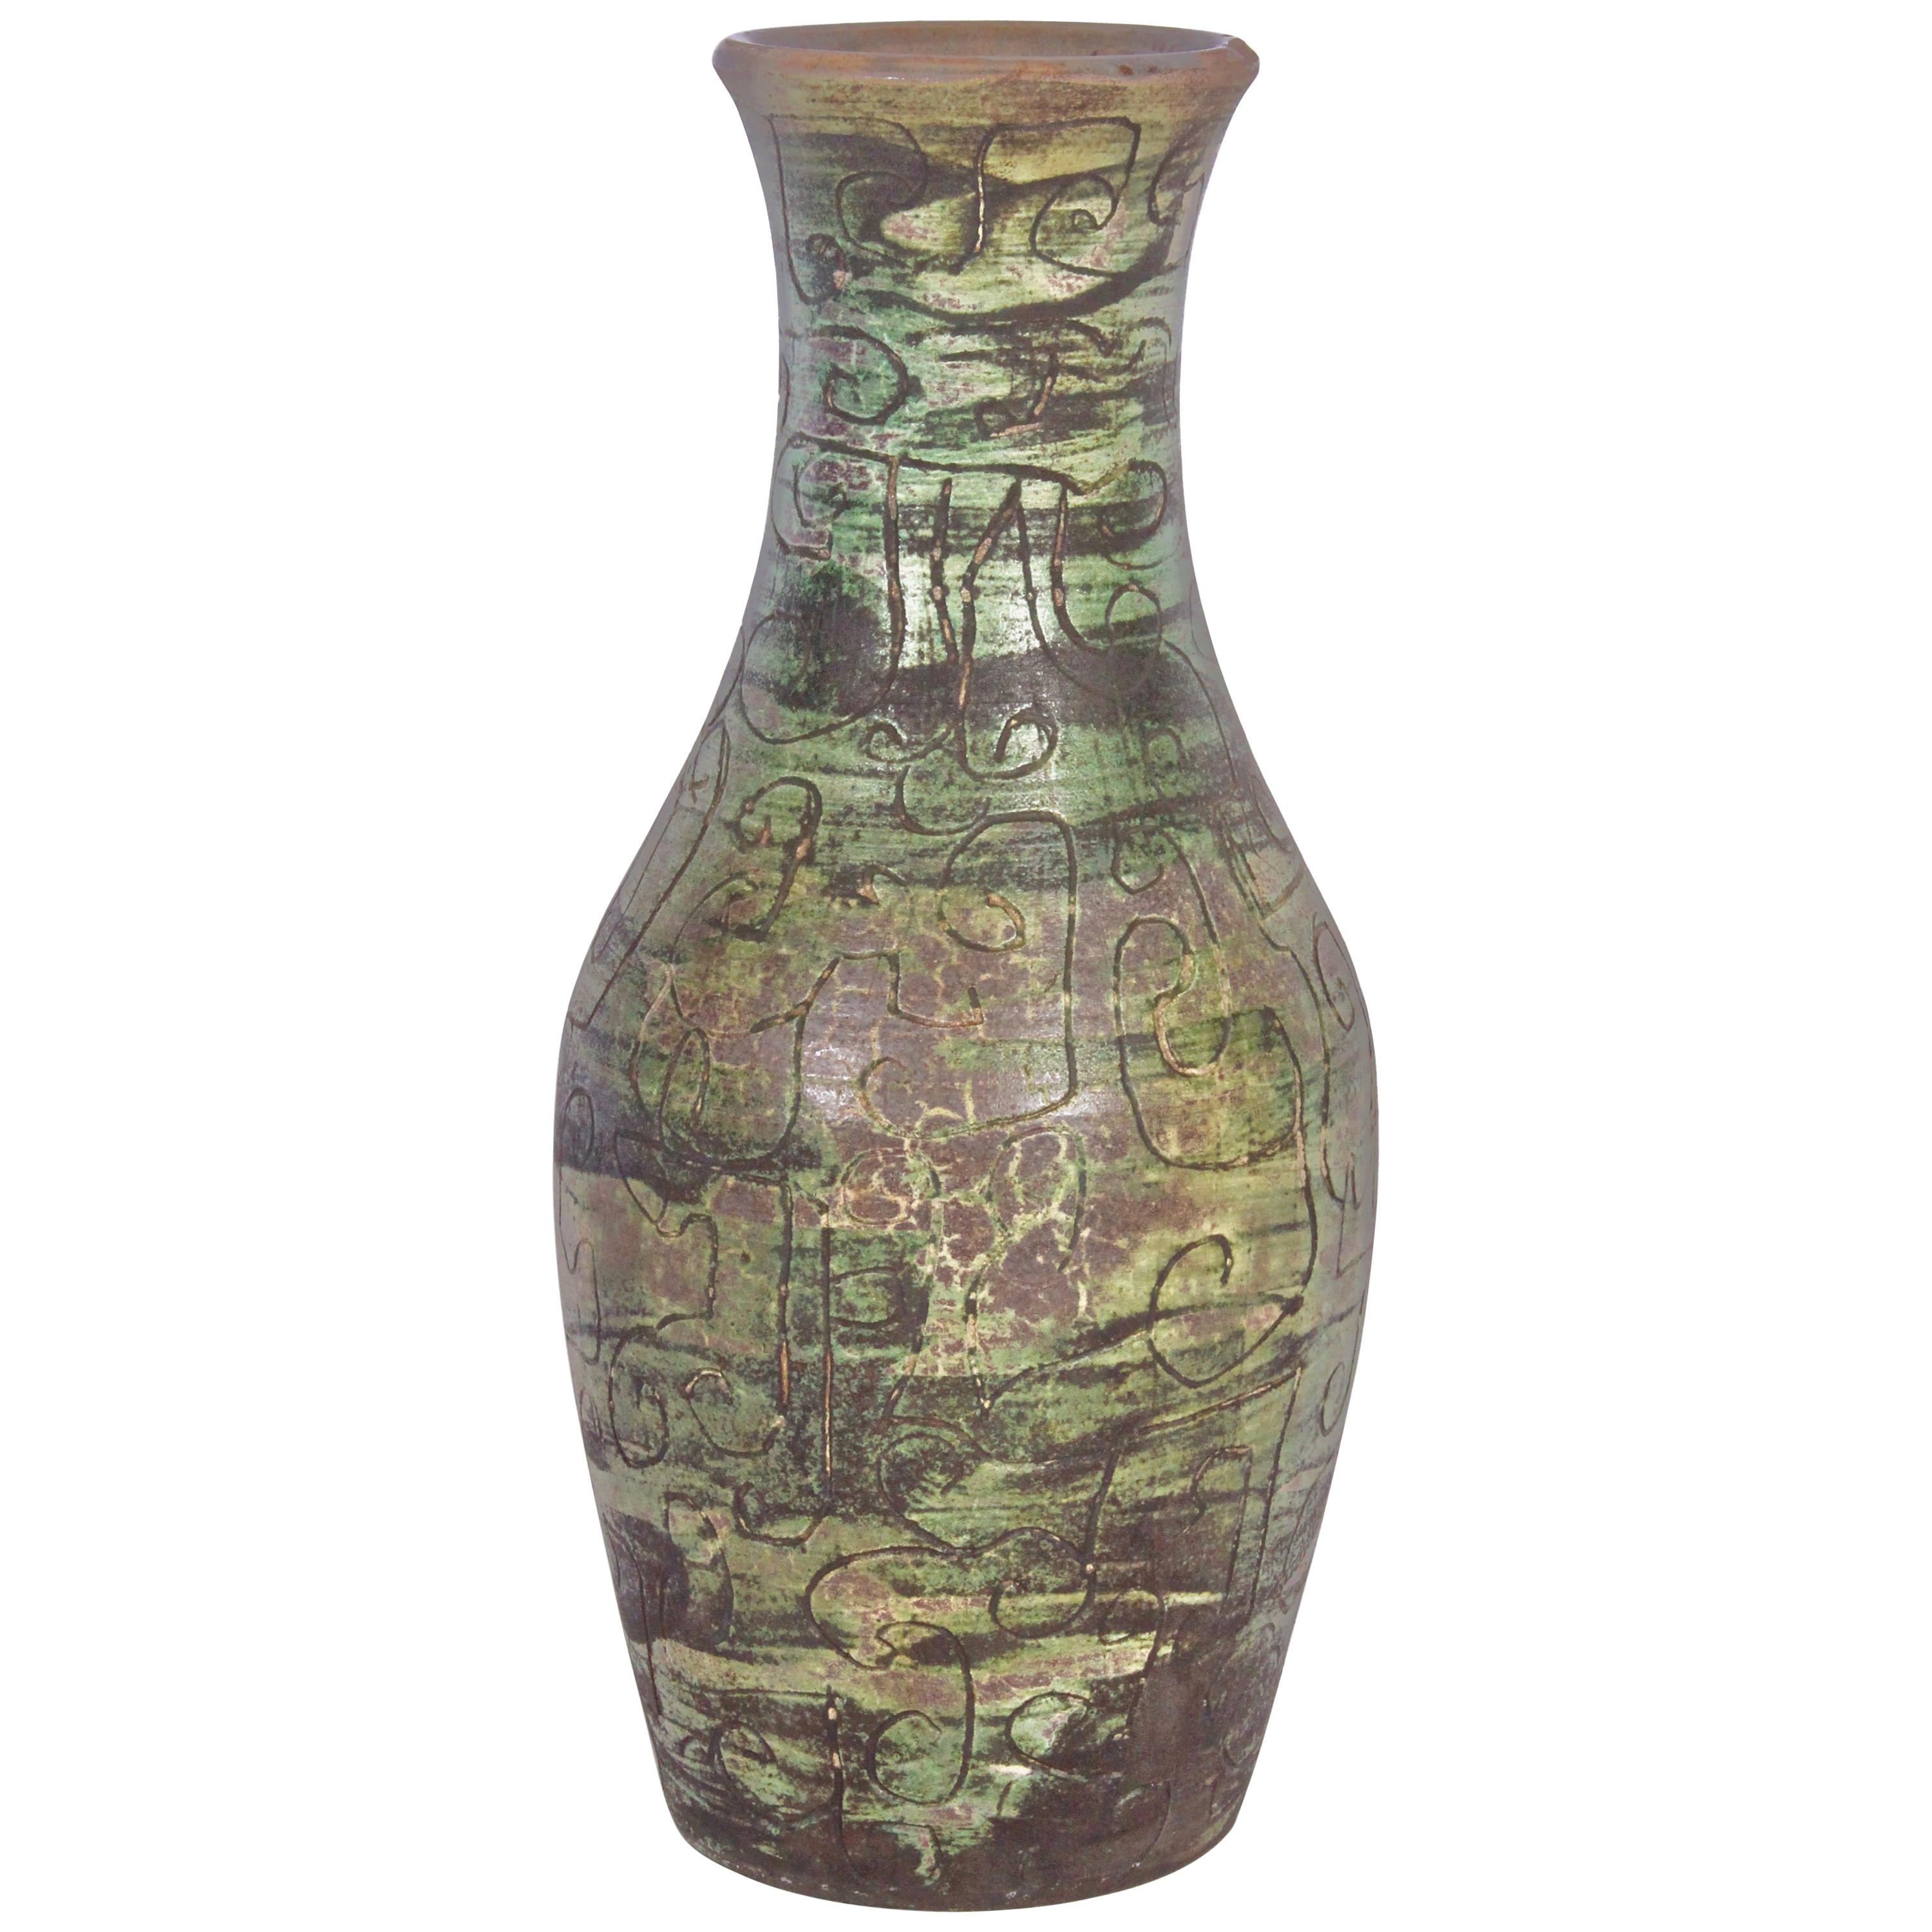 Signed French Incised Green Tone Art Studio Pottery Vase, circa 1950